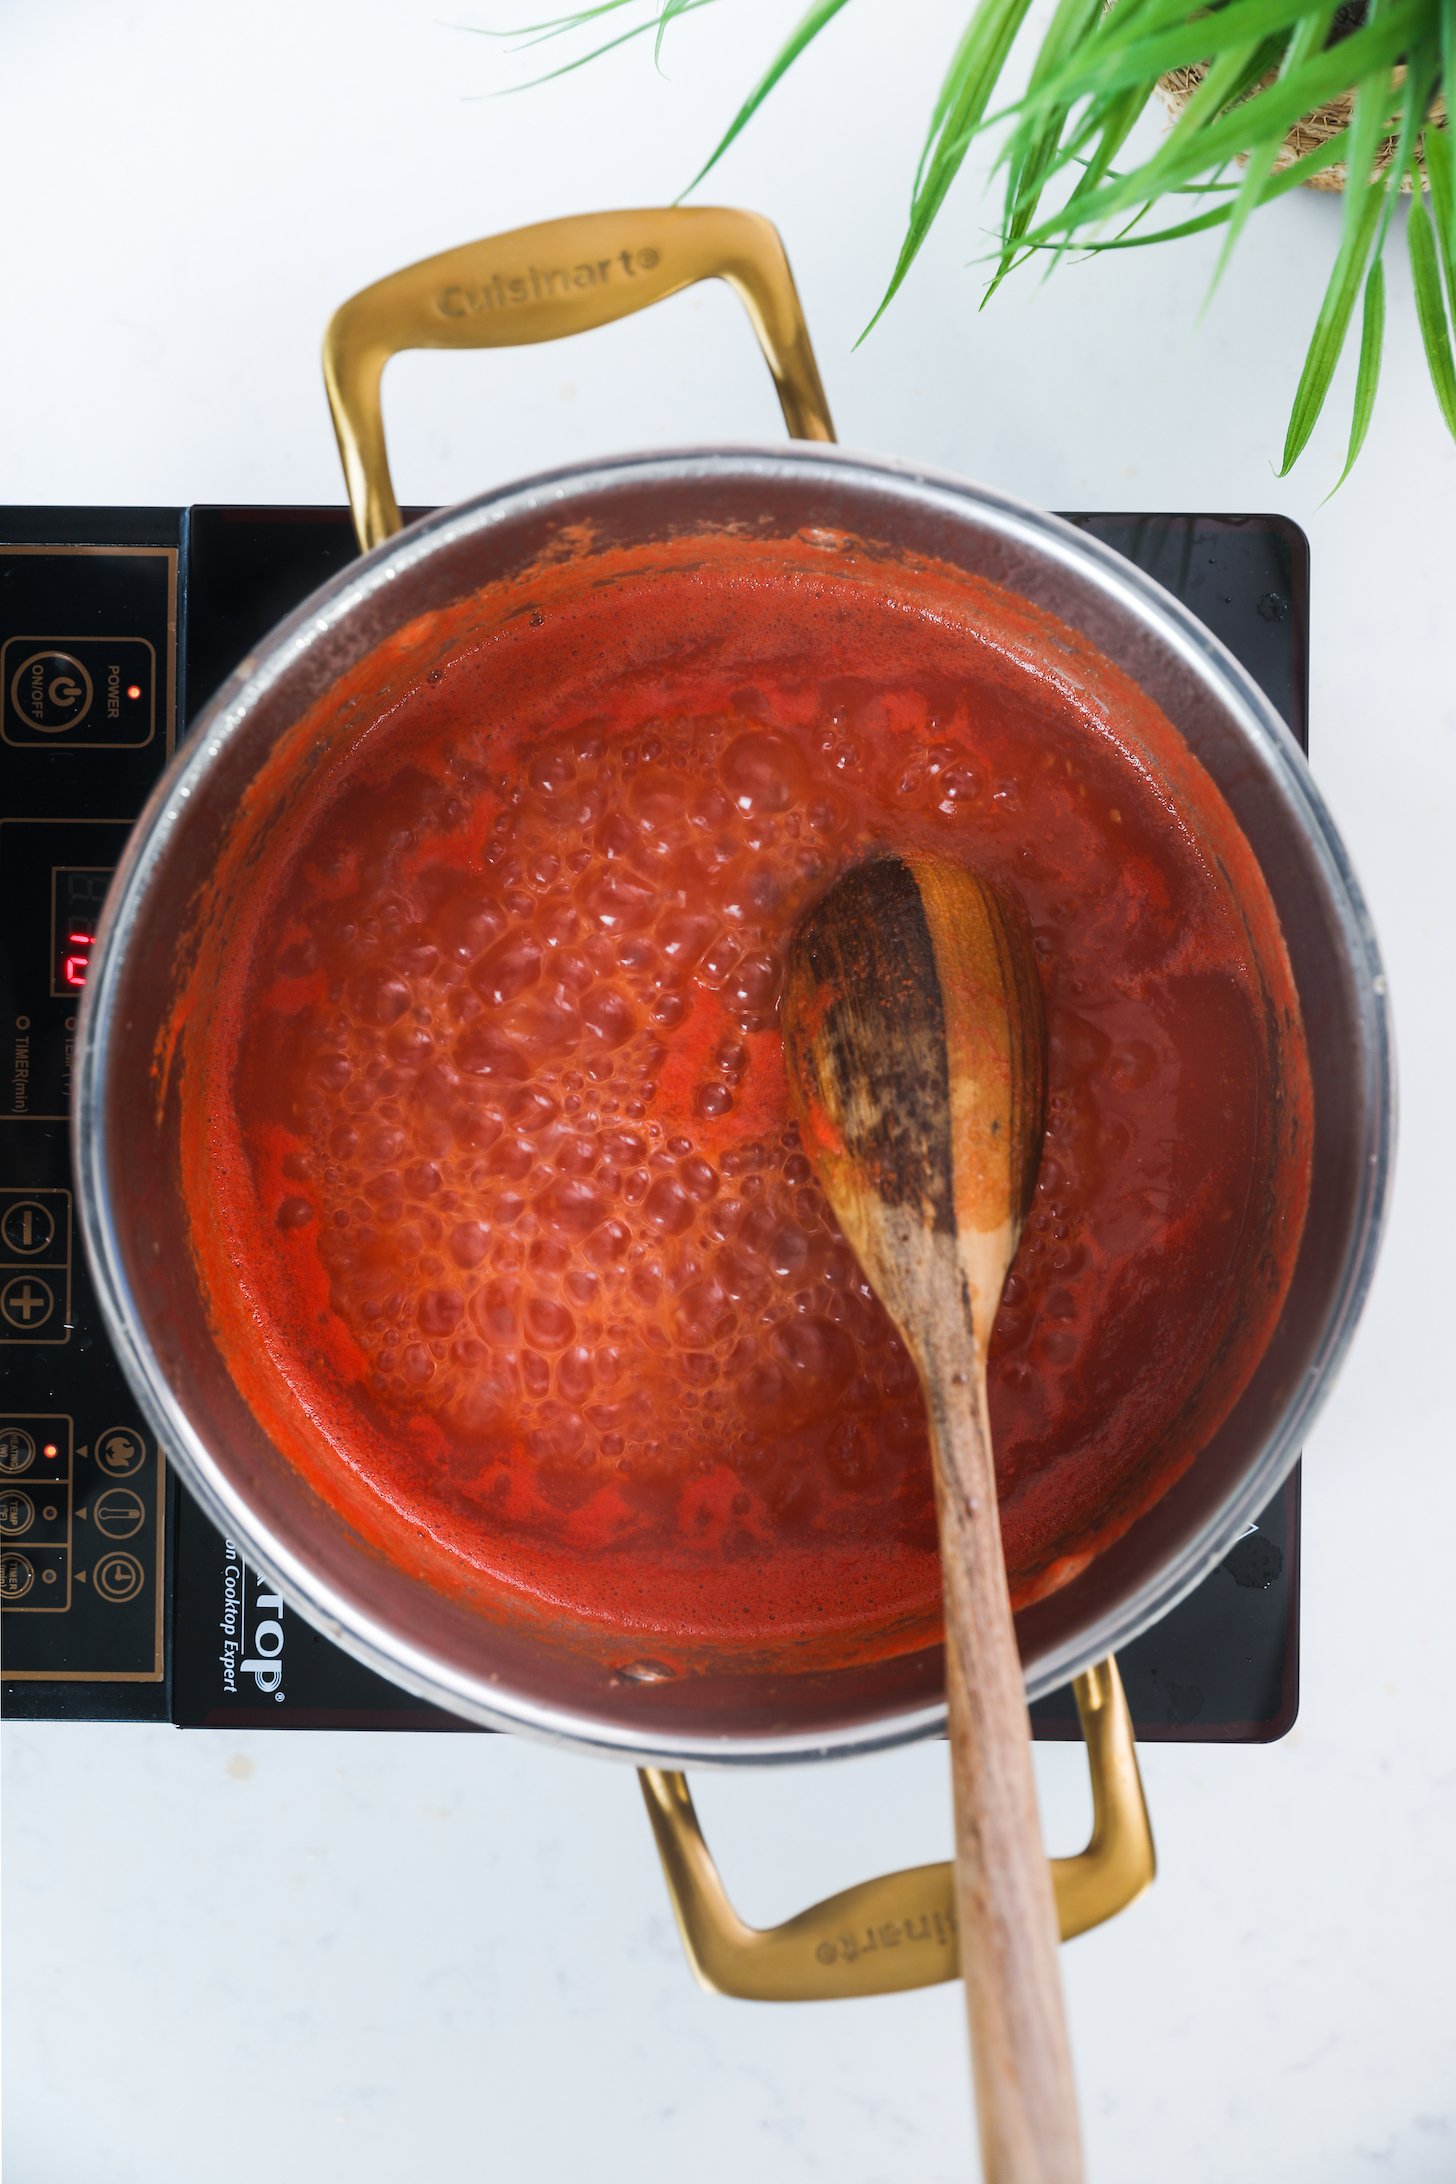 Bubbling tomato sauce in a pot with a wooden spoon.